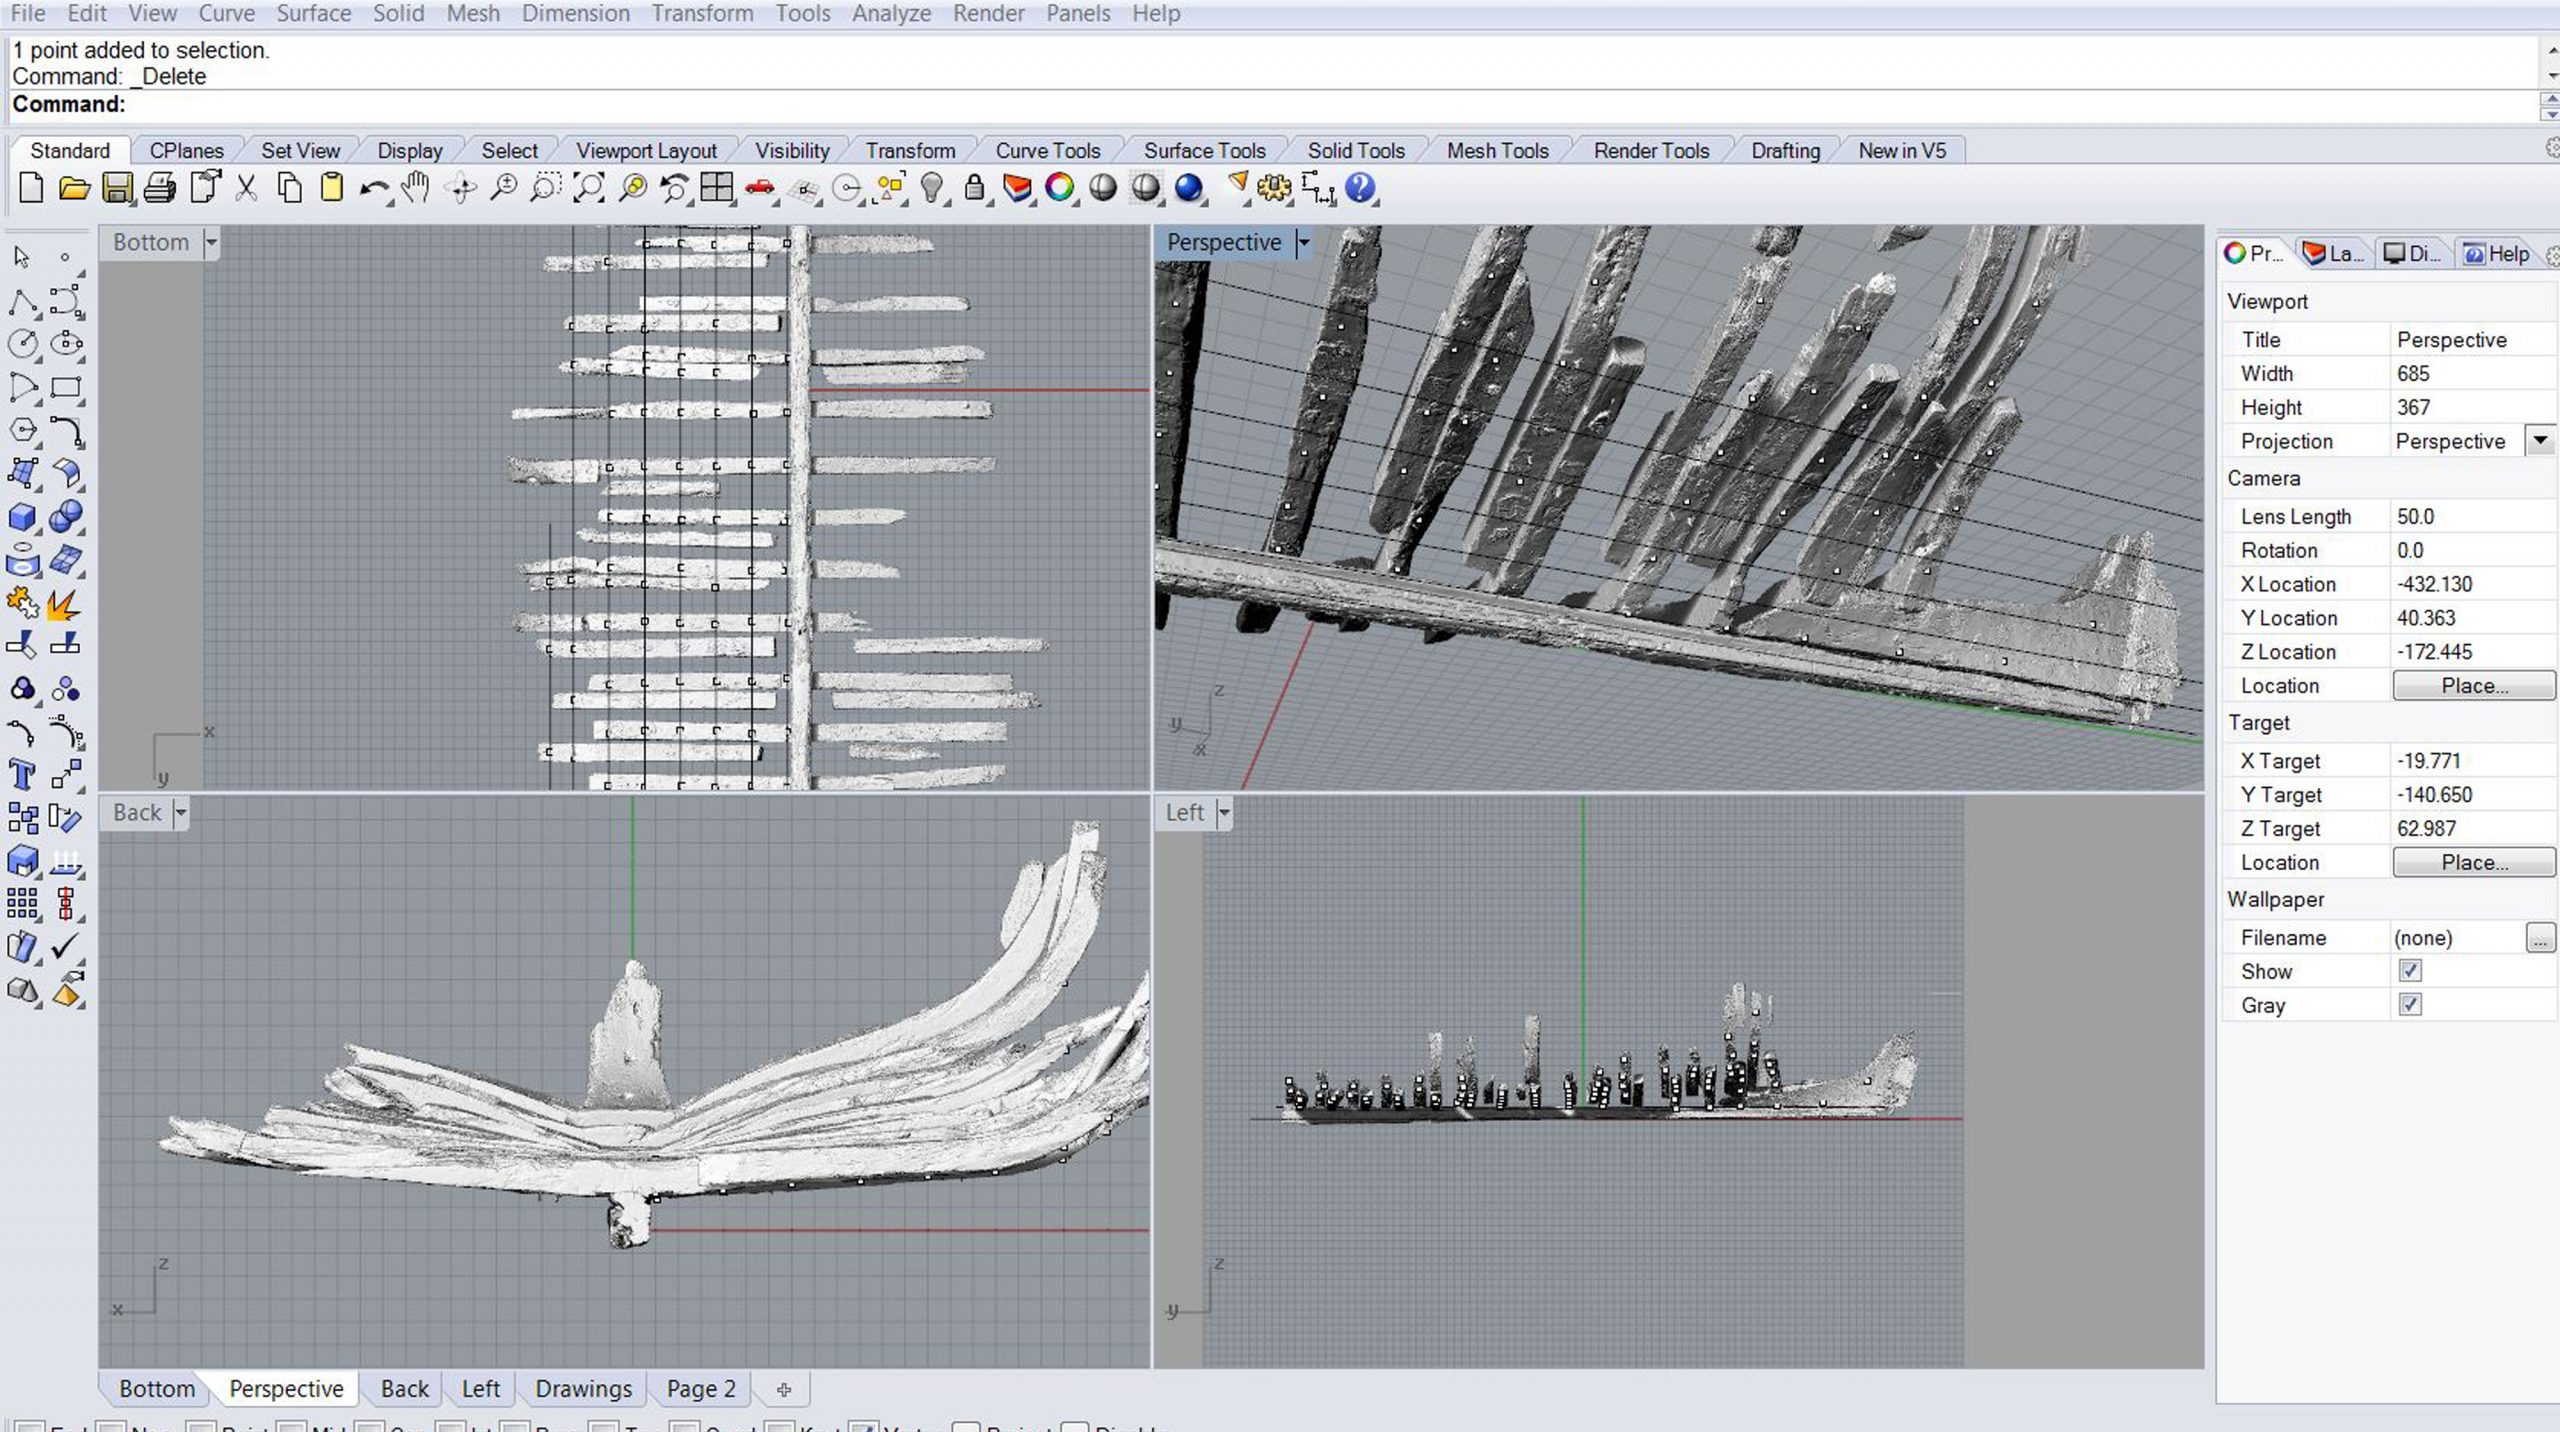 Screen image of the 3-D rendering software showing the ship remains